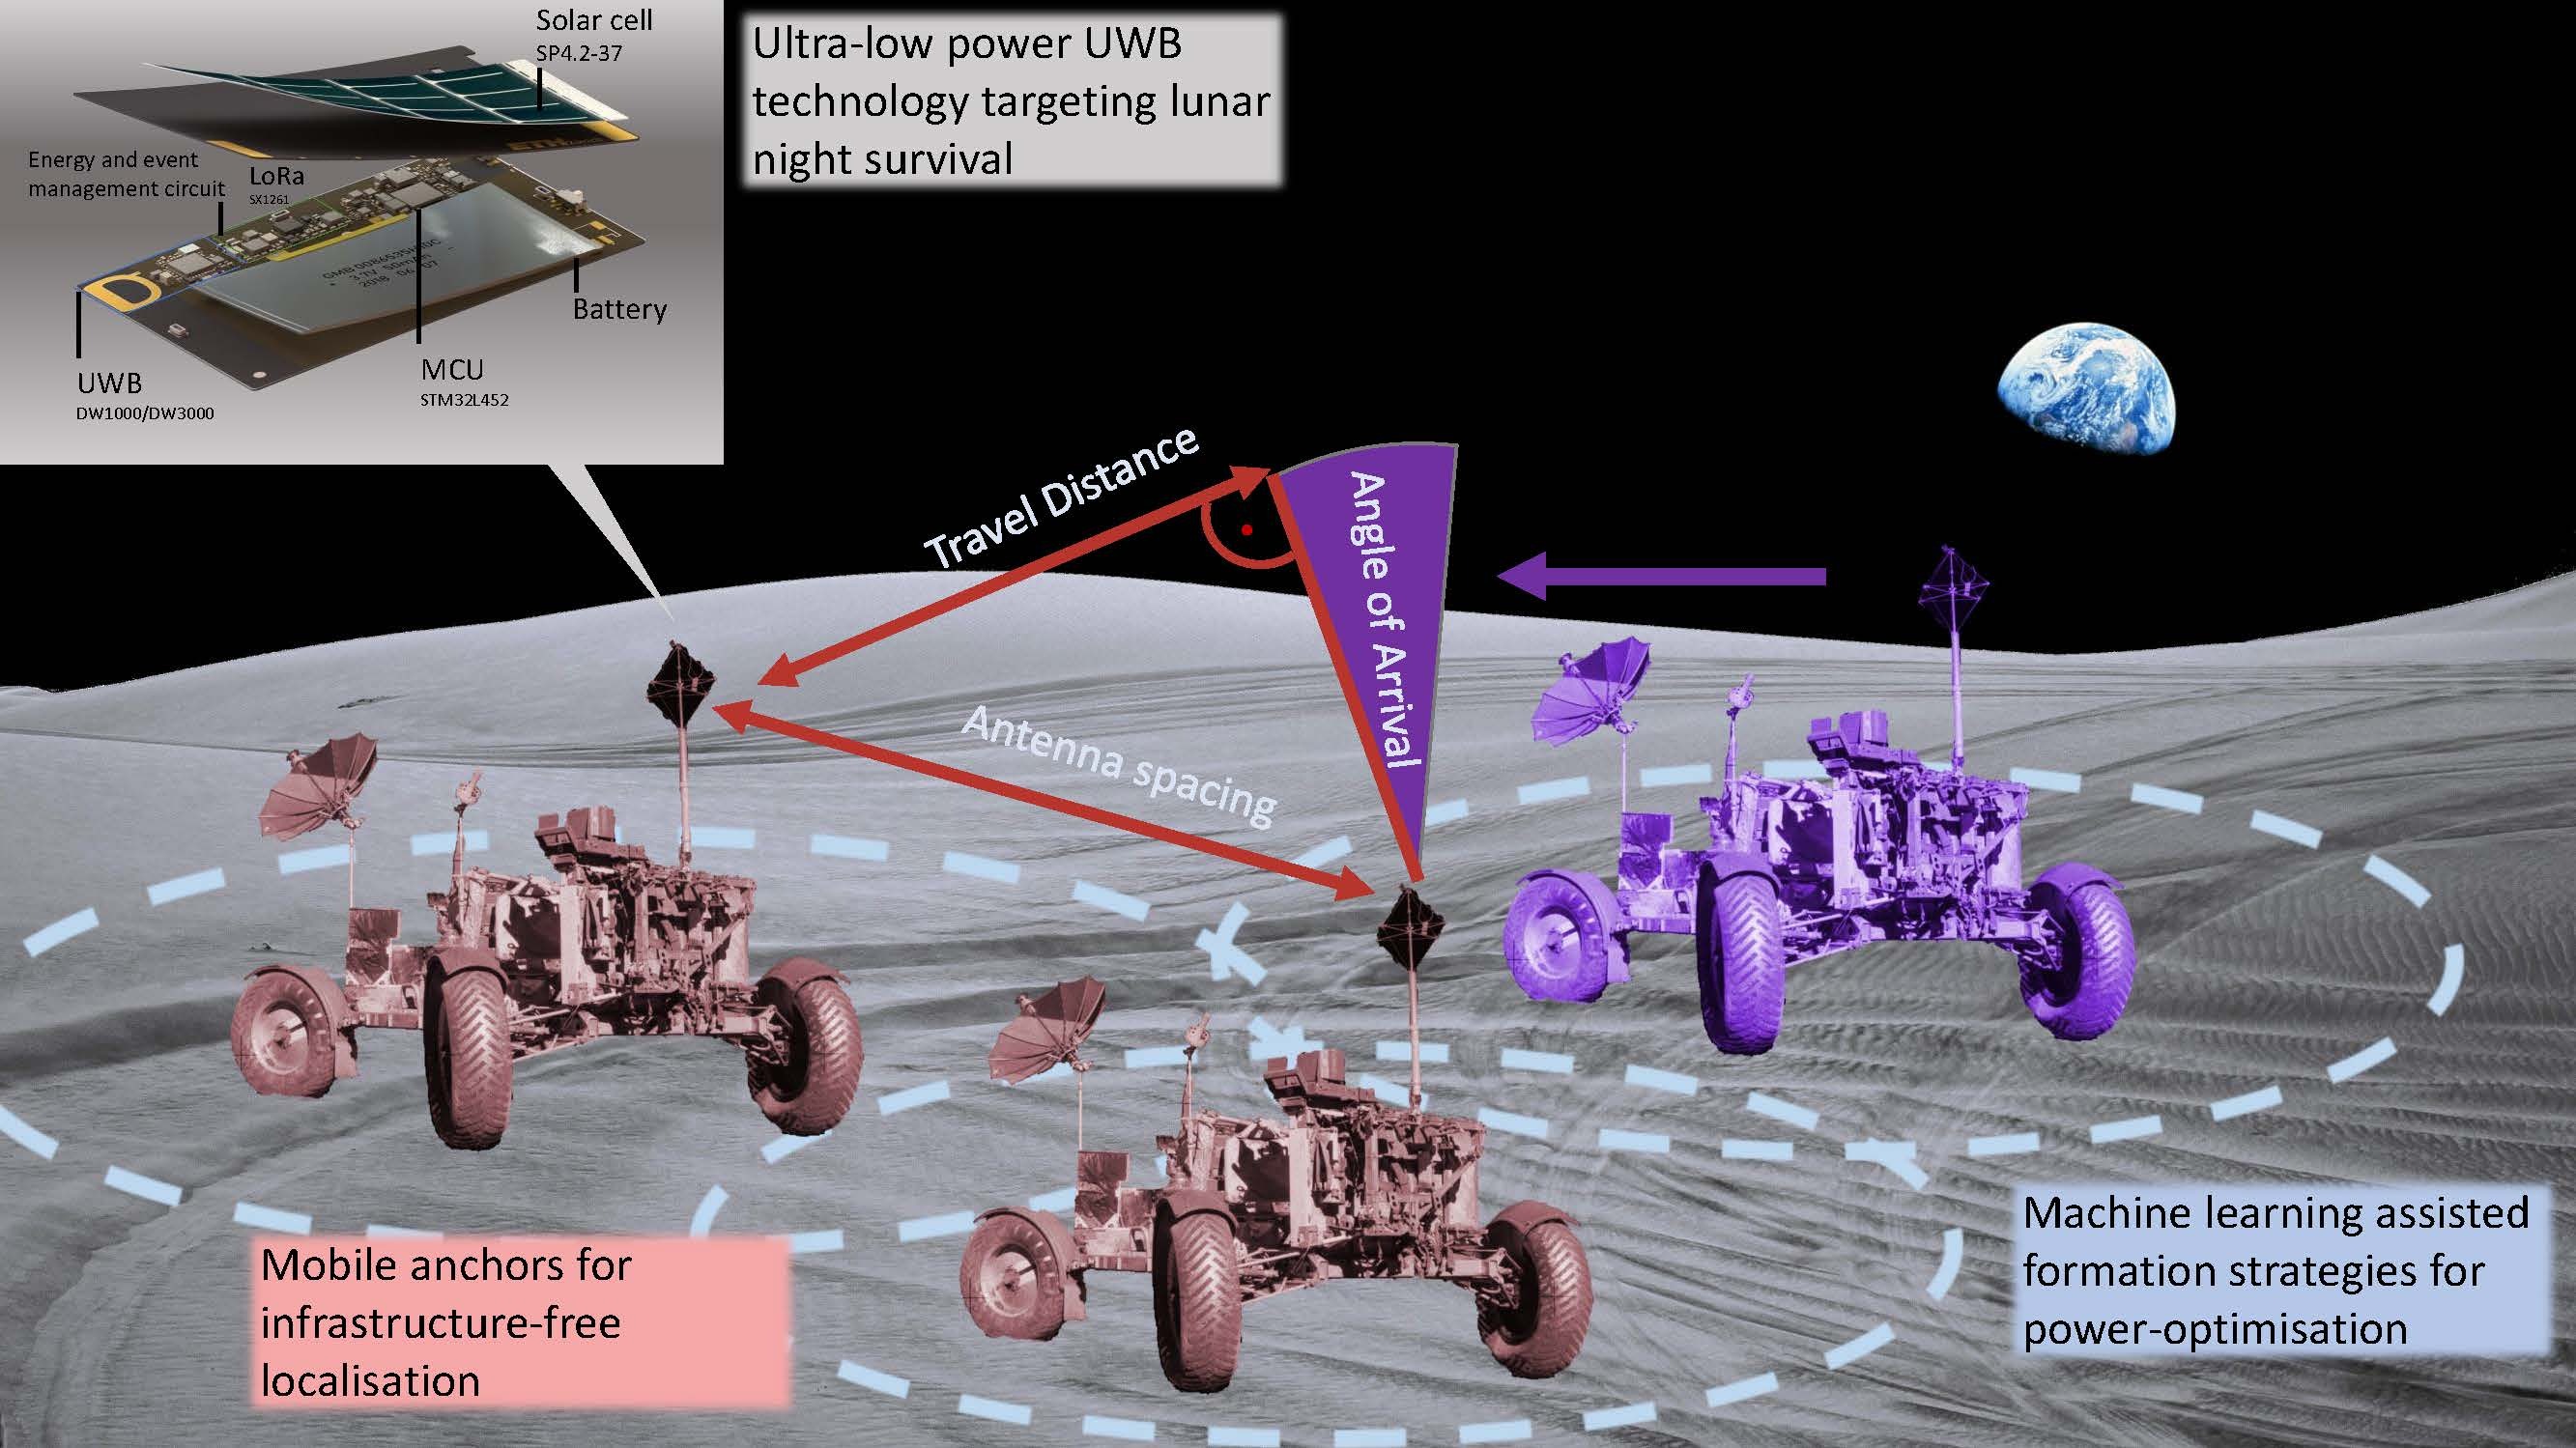 Energy-aware infrastructure-free localization for robotic swarms on lunar south pole missions